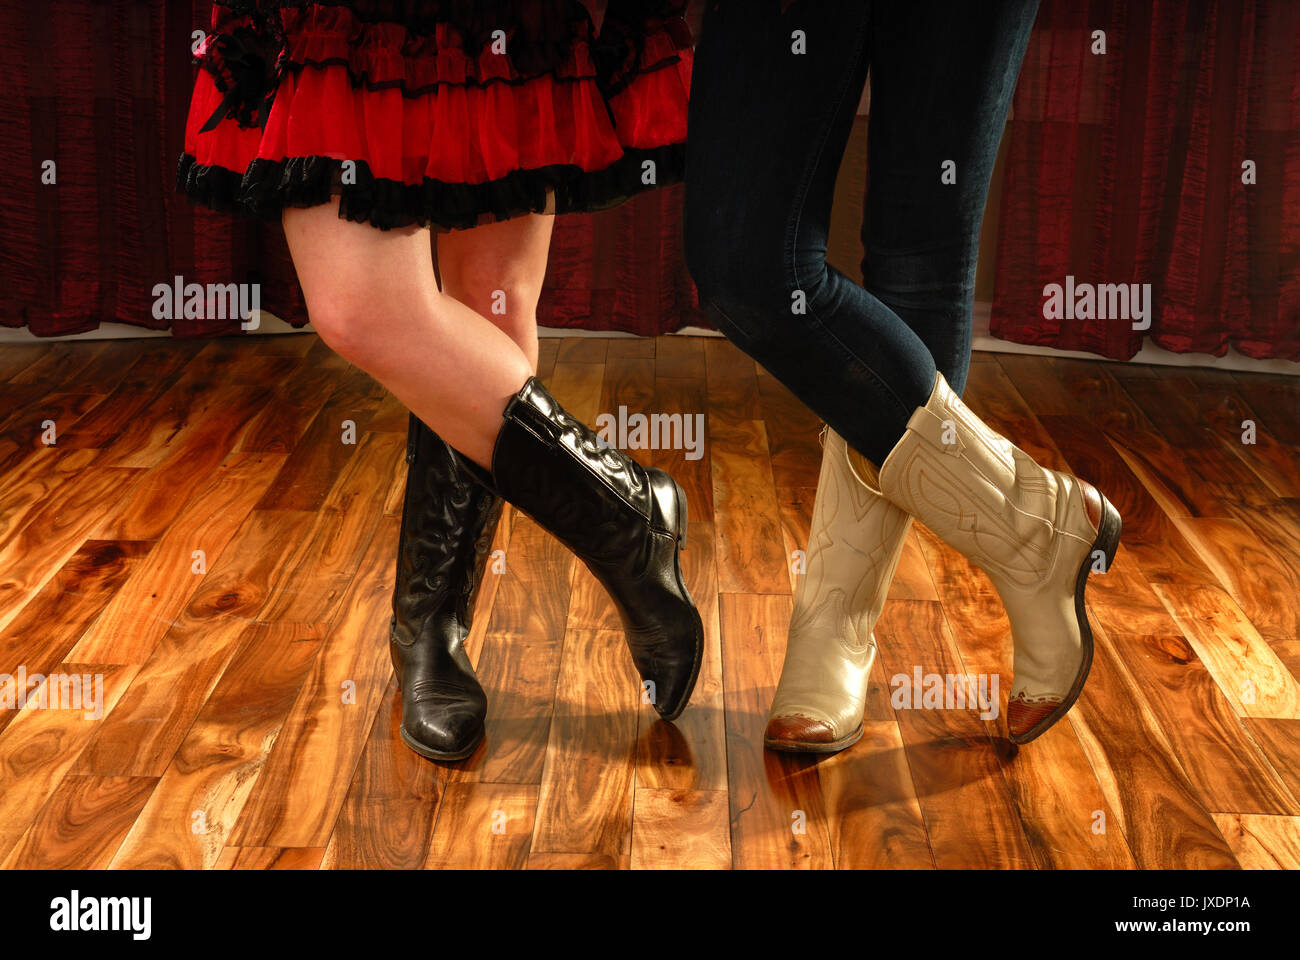 Female Legs in Cowboy Boots in a Line Dance Step on hardwood floor Stock Photo